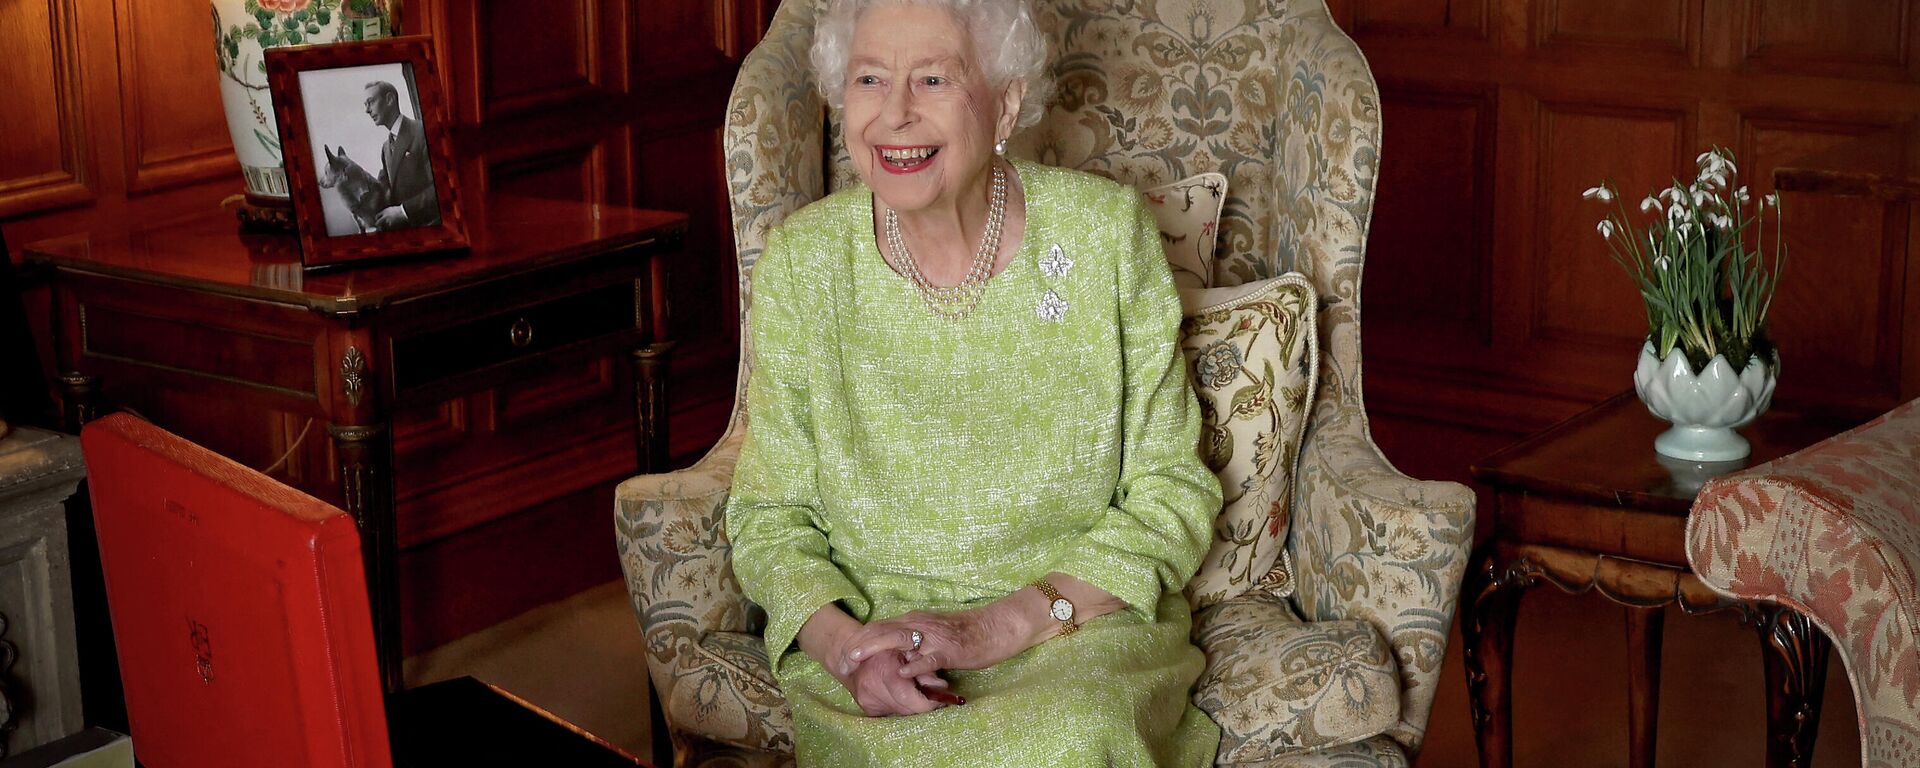 A file Buckingham Palace handout image released on February 6, 2022, shows Britain's Queen Elizabeth II smiling as she sits in Sandringham House in Norfolk, eastern England on February 2, 2022 - Sputnik International, 1920, 19.03.2022